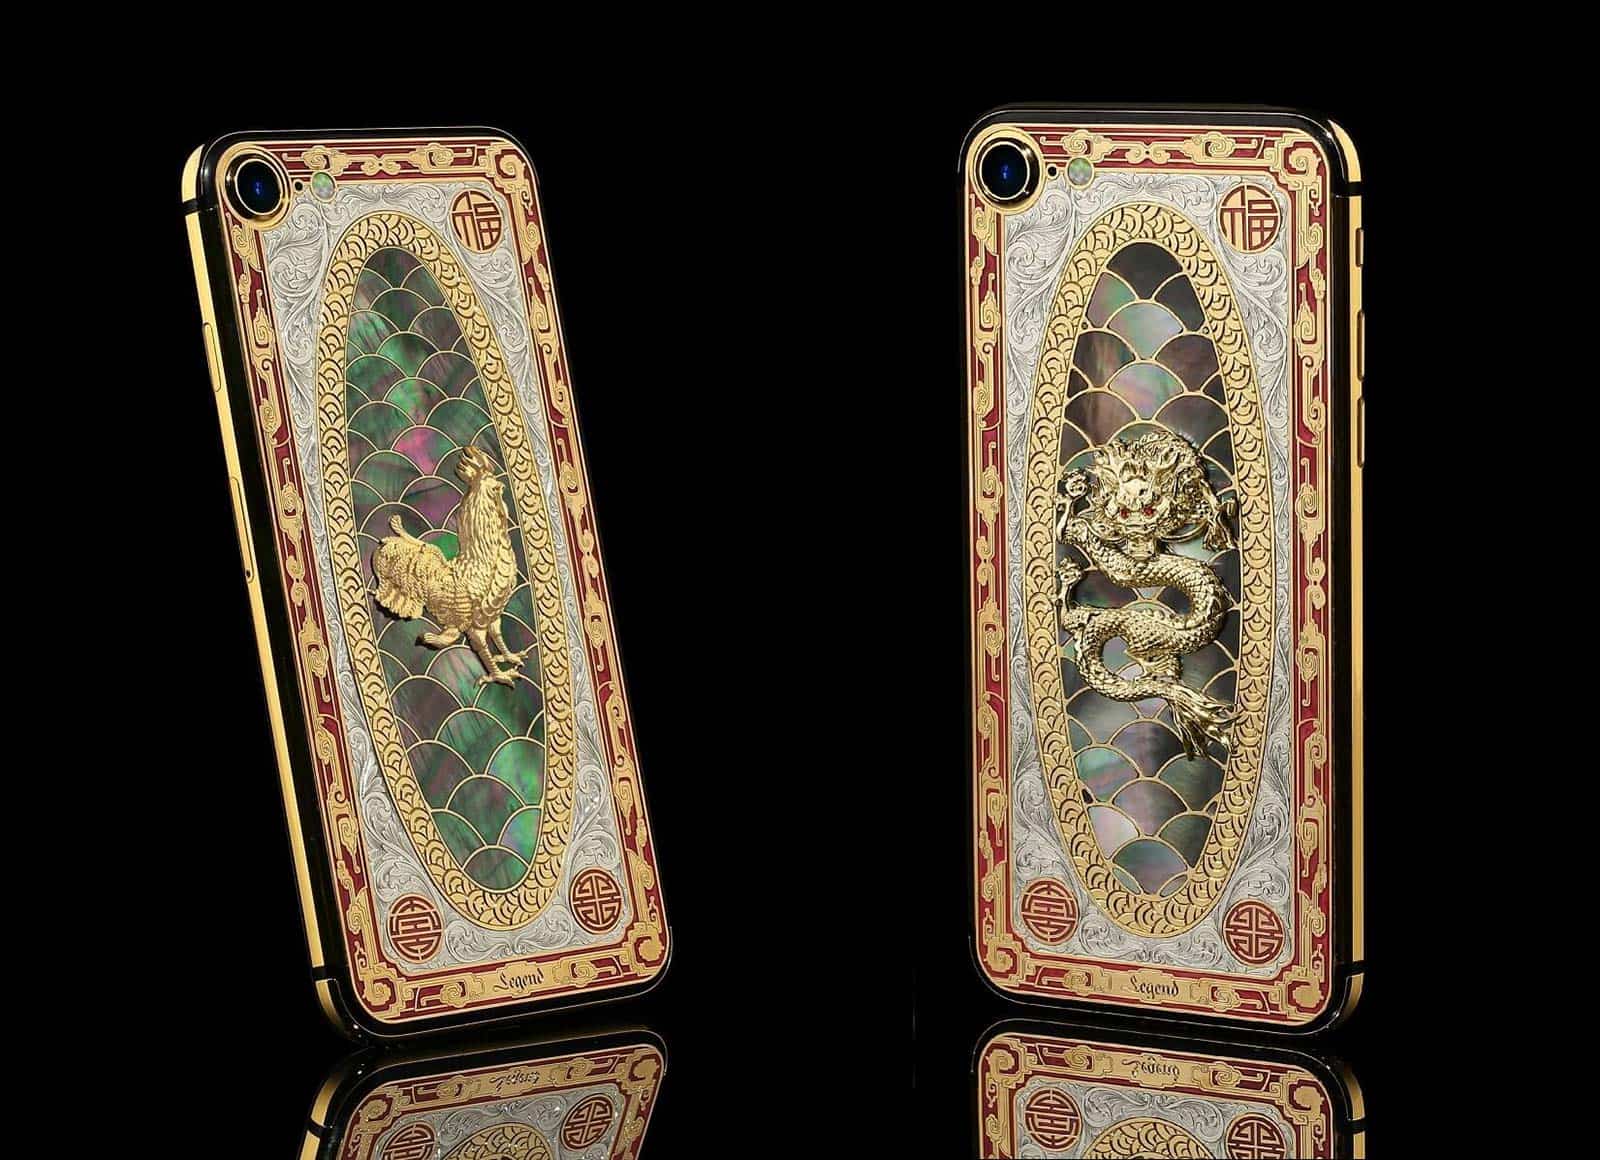 Think your iPhone 7 looks like all the others? These gilded 7s, which includes one to mark the Year of the Rooster, were designed to appeal to the Chinese market.